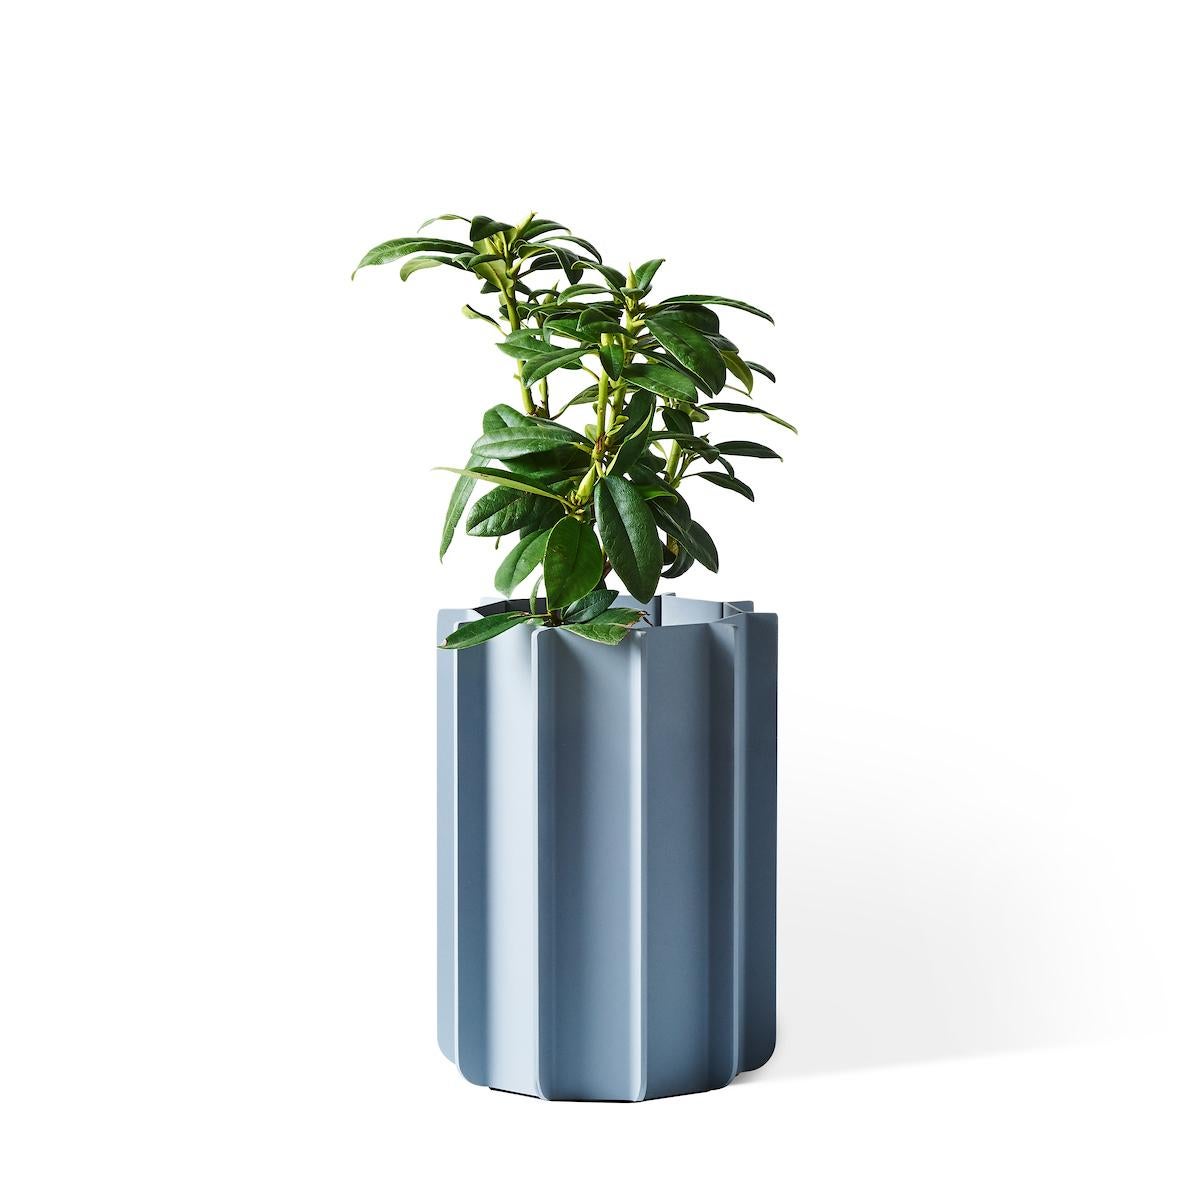 The Pleat planter is a great way to add a color accent to an interior space. Made from brake-formed 11 gauge aluminum, the planters are light and strong. The base is fitted with 1/4